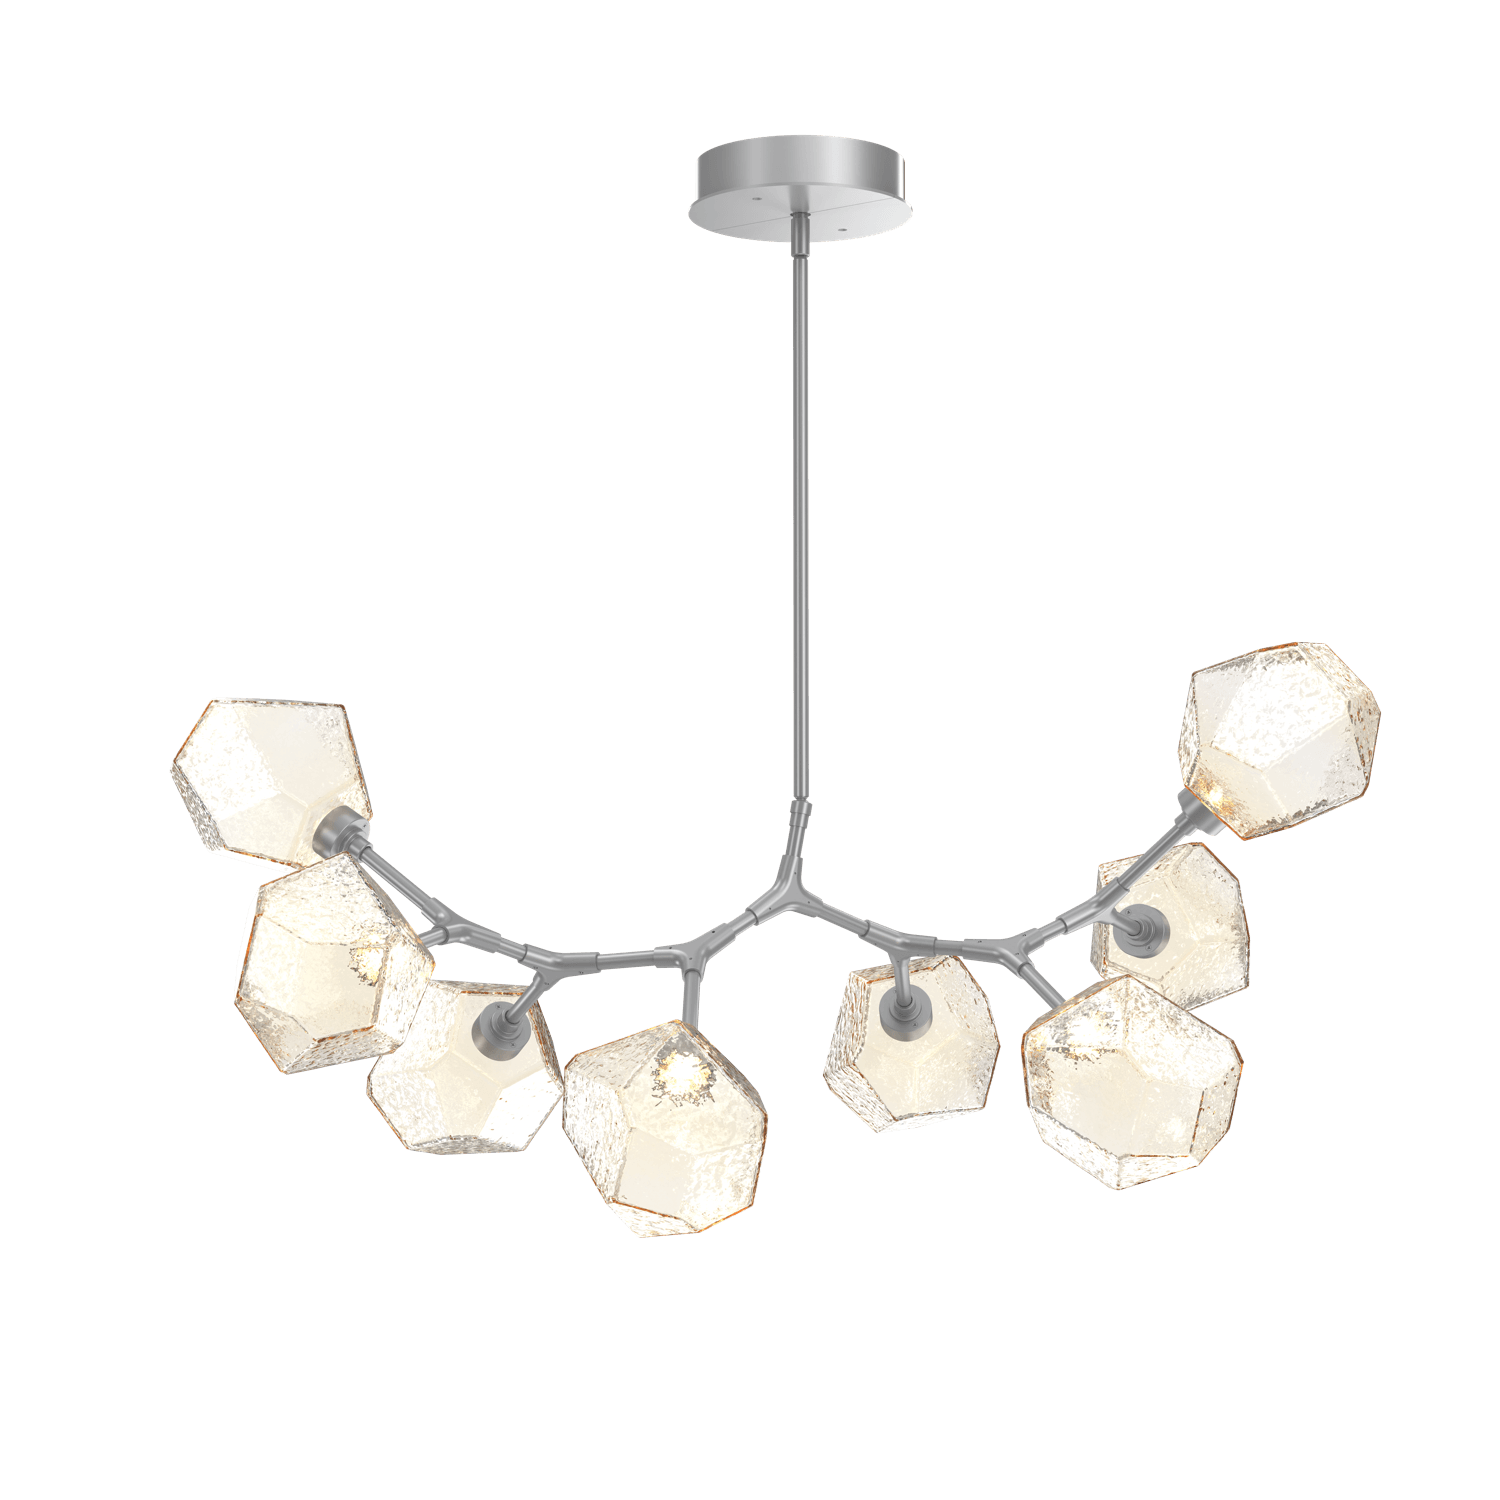 PLB0039-BB-CS-A-Hammerton-Studio-Gem-8-light-modern-branch-chandelier-with-classic-silver-finish-and-amber-blown-glass-shades-and-LED-lamping